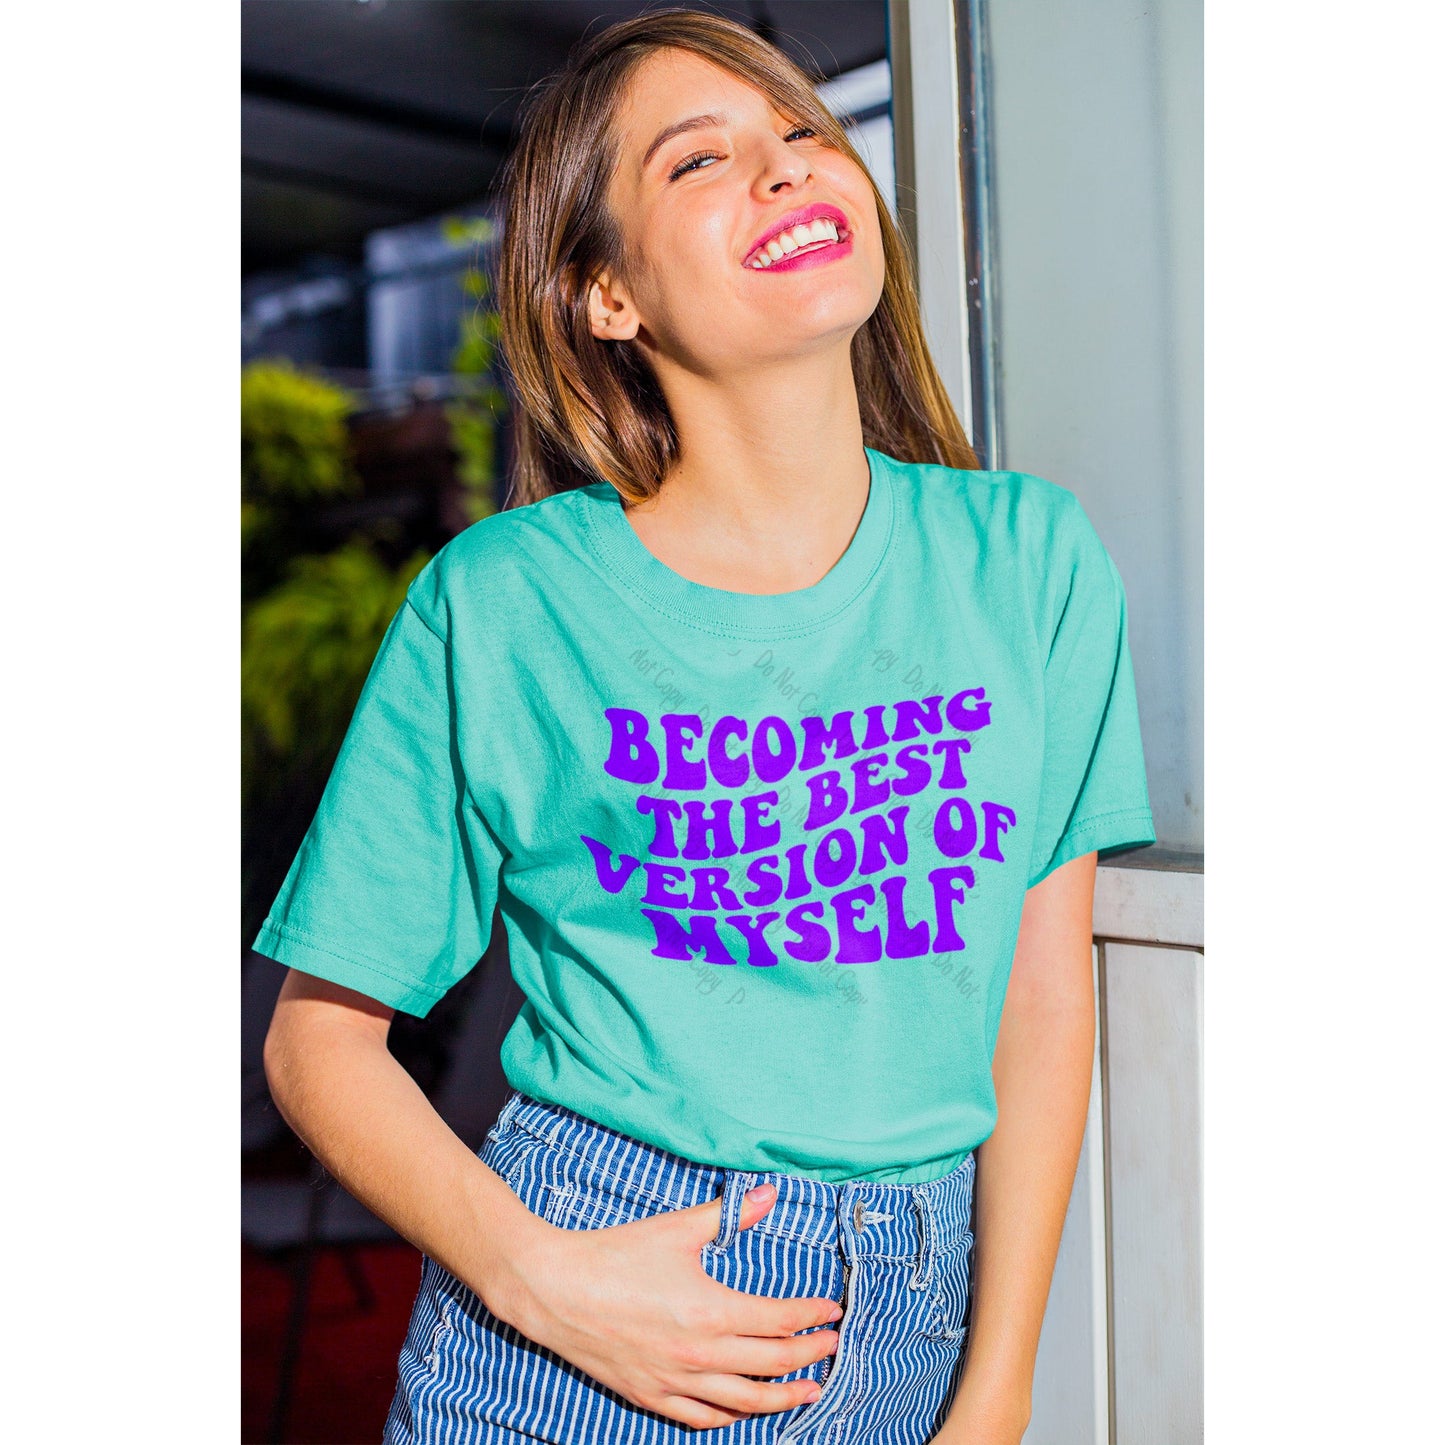 Becoming the Best Version of Yourself T-shirt